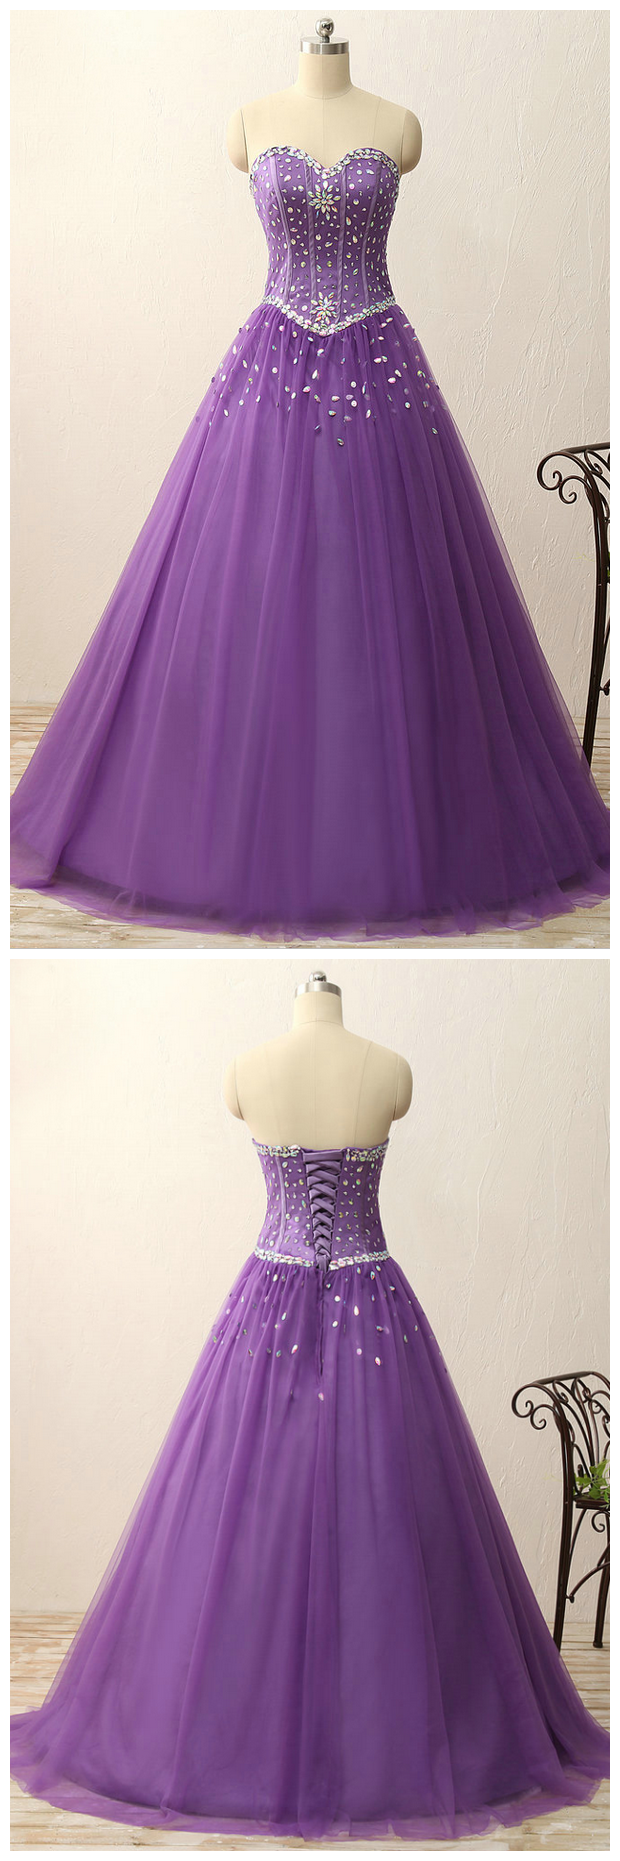 Charming Prom Dress, Formatura Sweetheart Crystal Beads Satin Tulle Floor Length Ball Gown Vintage Dress Prom Dress